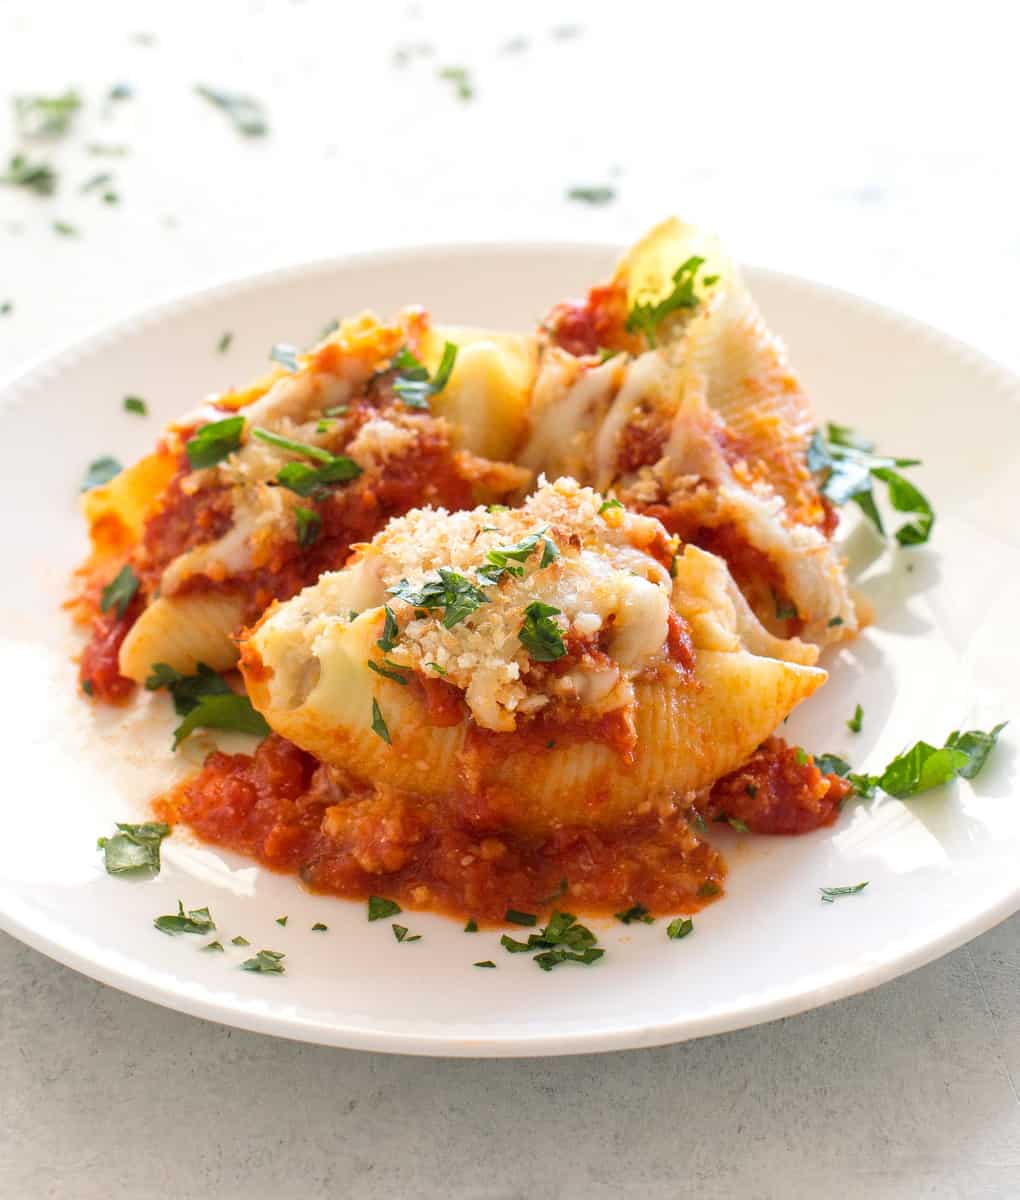 https://www.the-girl-who-ate-everything.com/wp-content/uploads/2021/02/chicken-parmesan-stuffed-shells-1-2.jpg